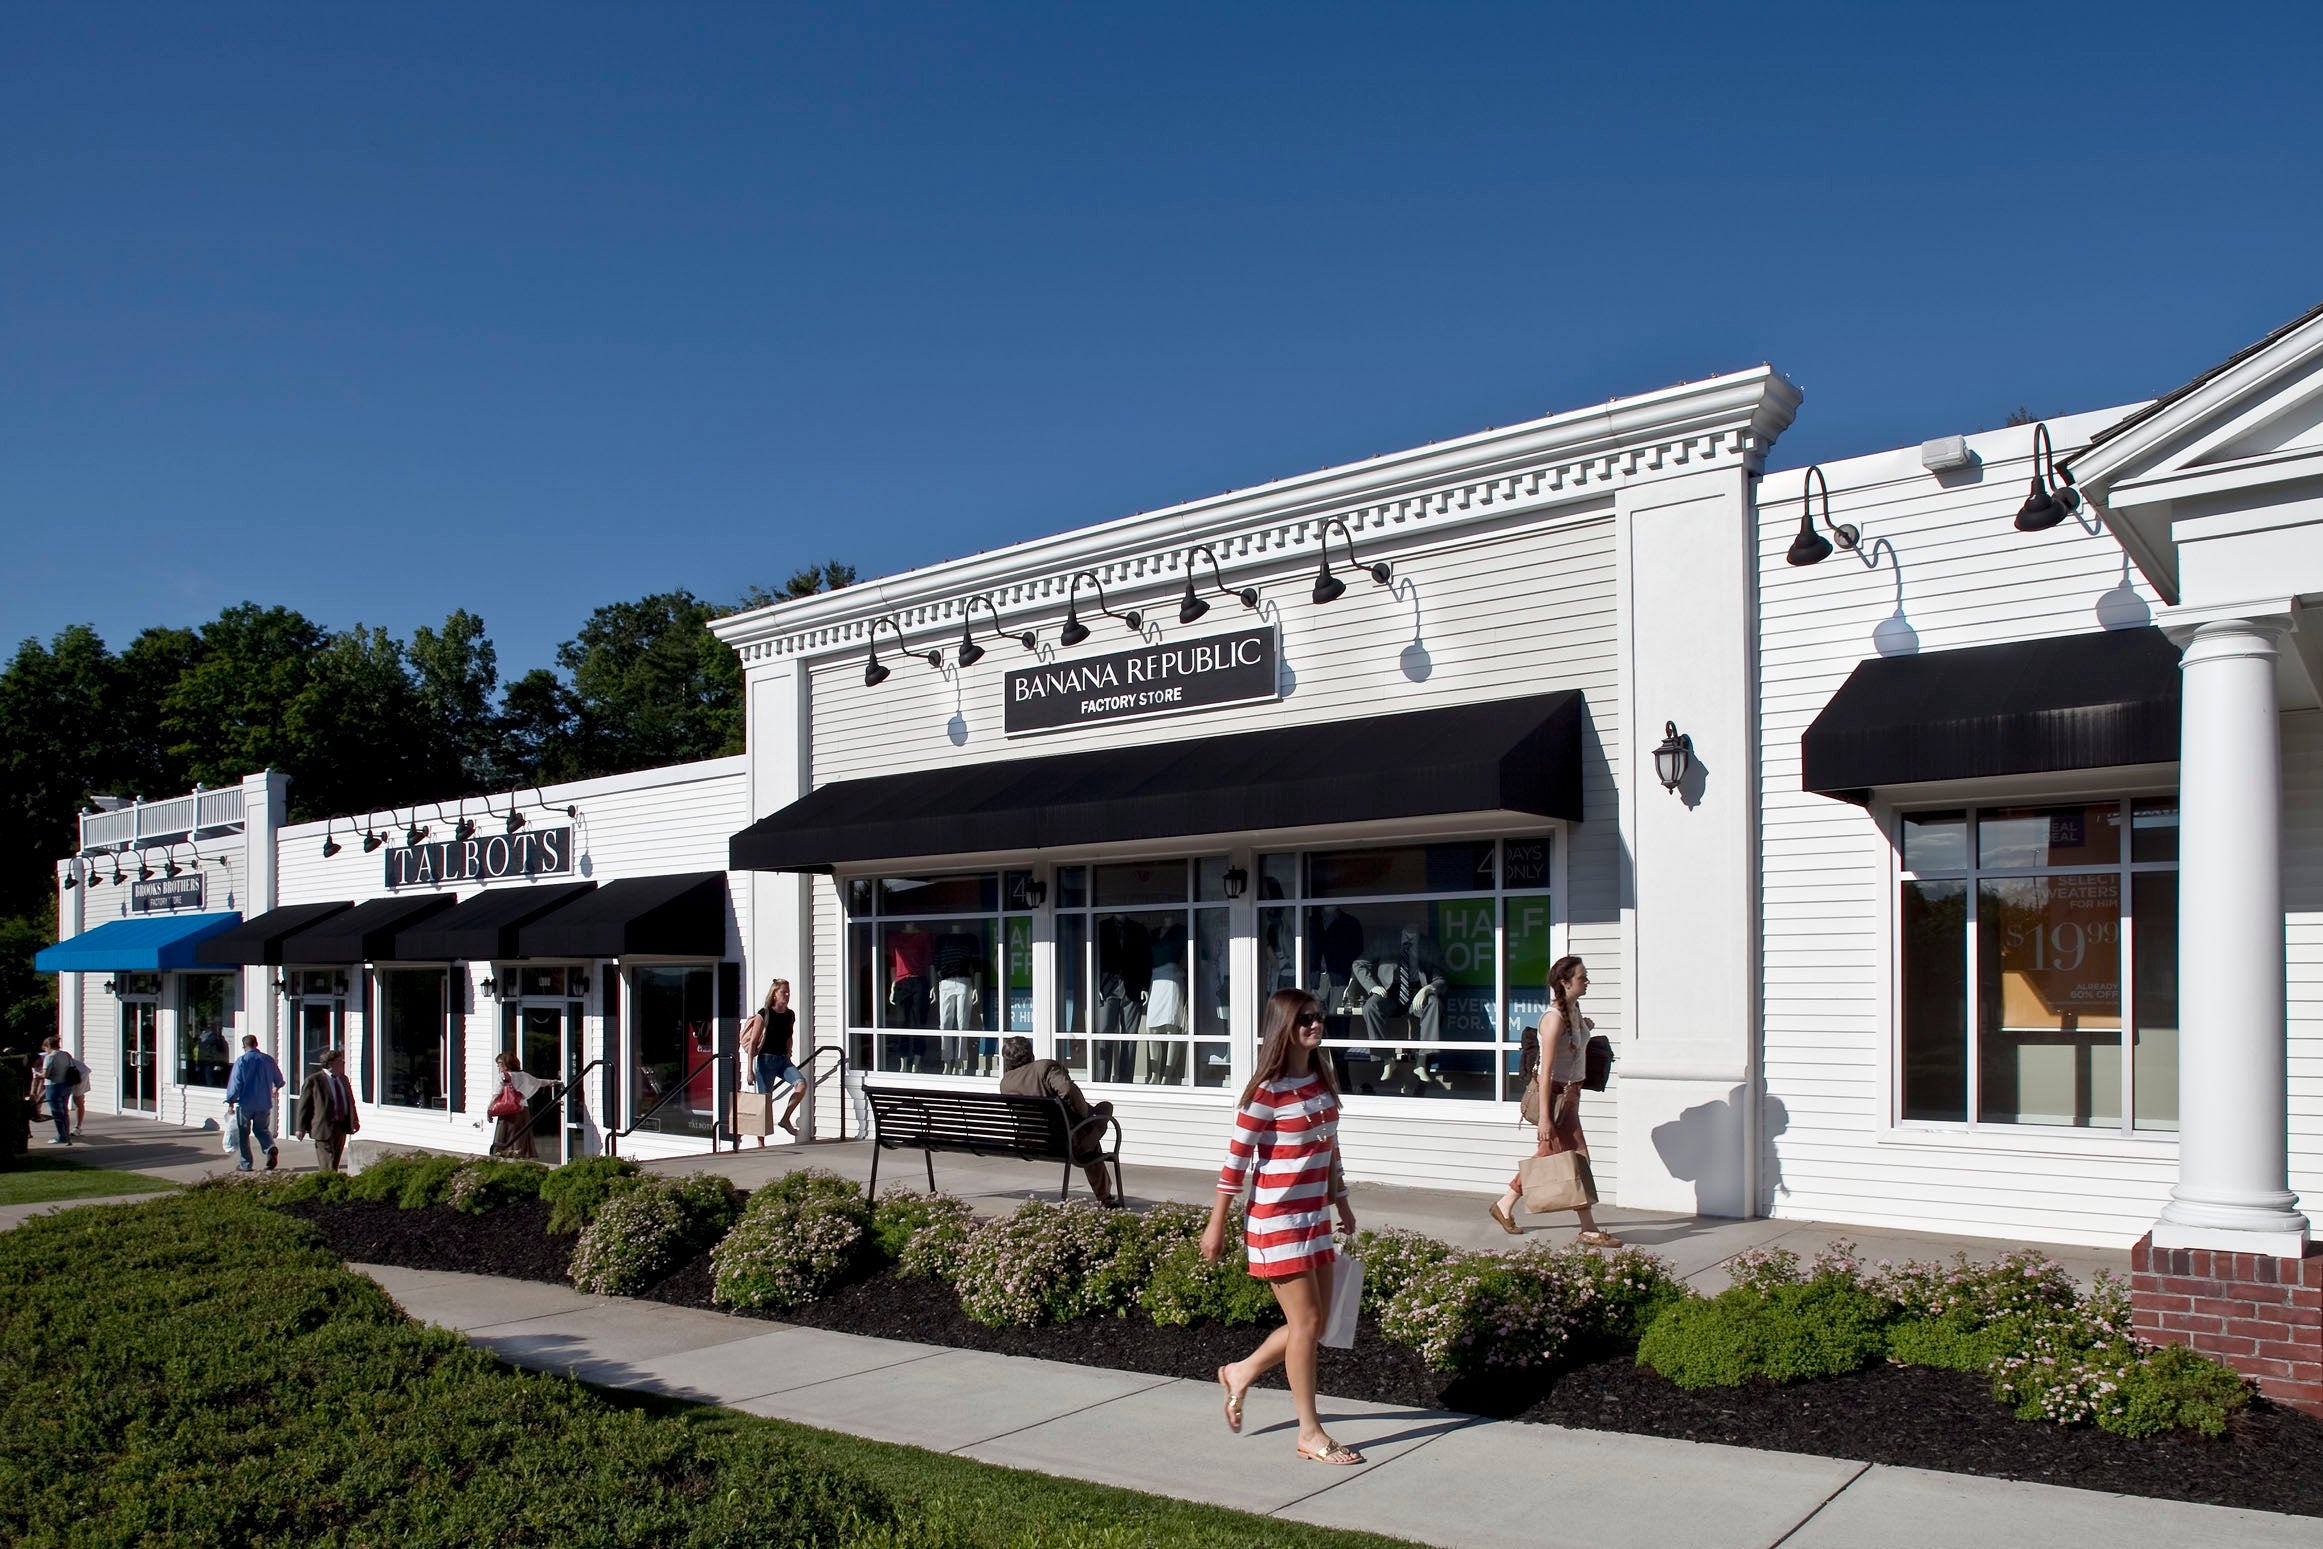 Talbots Clearance Outlet, Hingham - MA